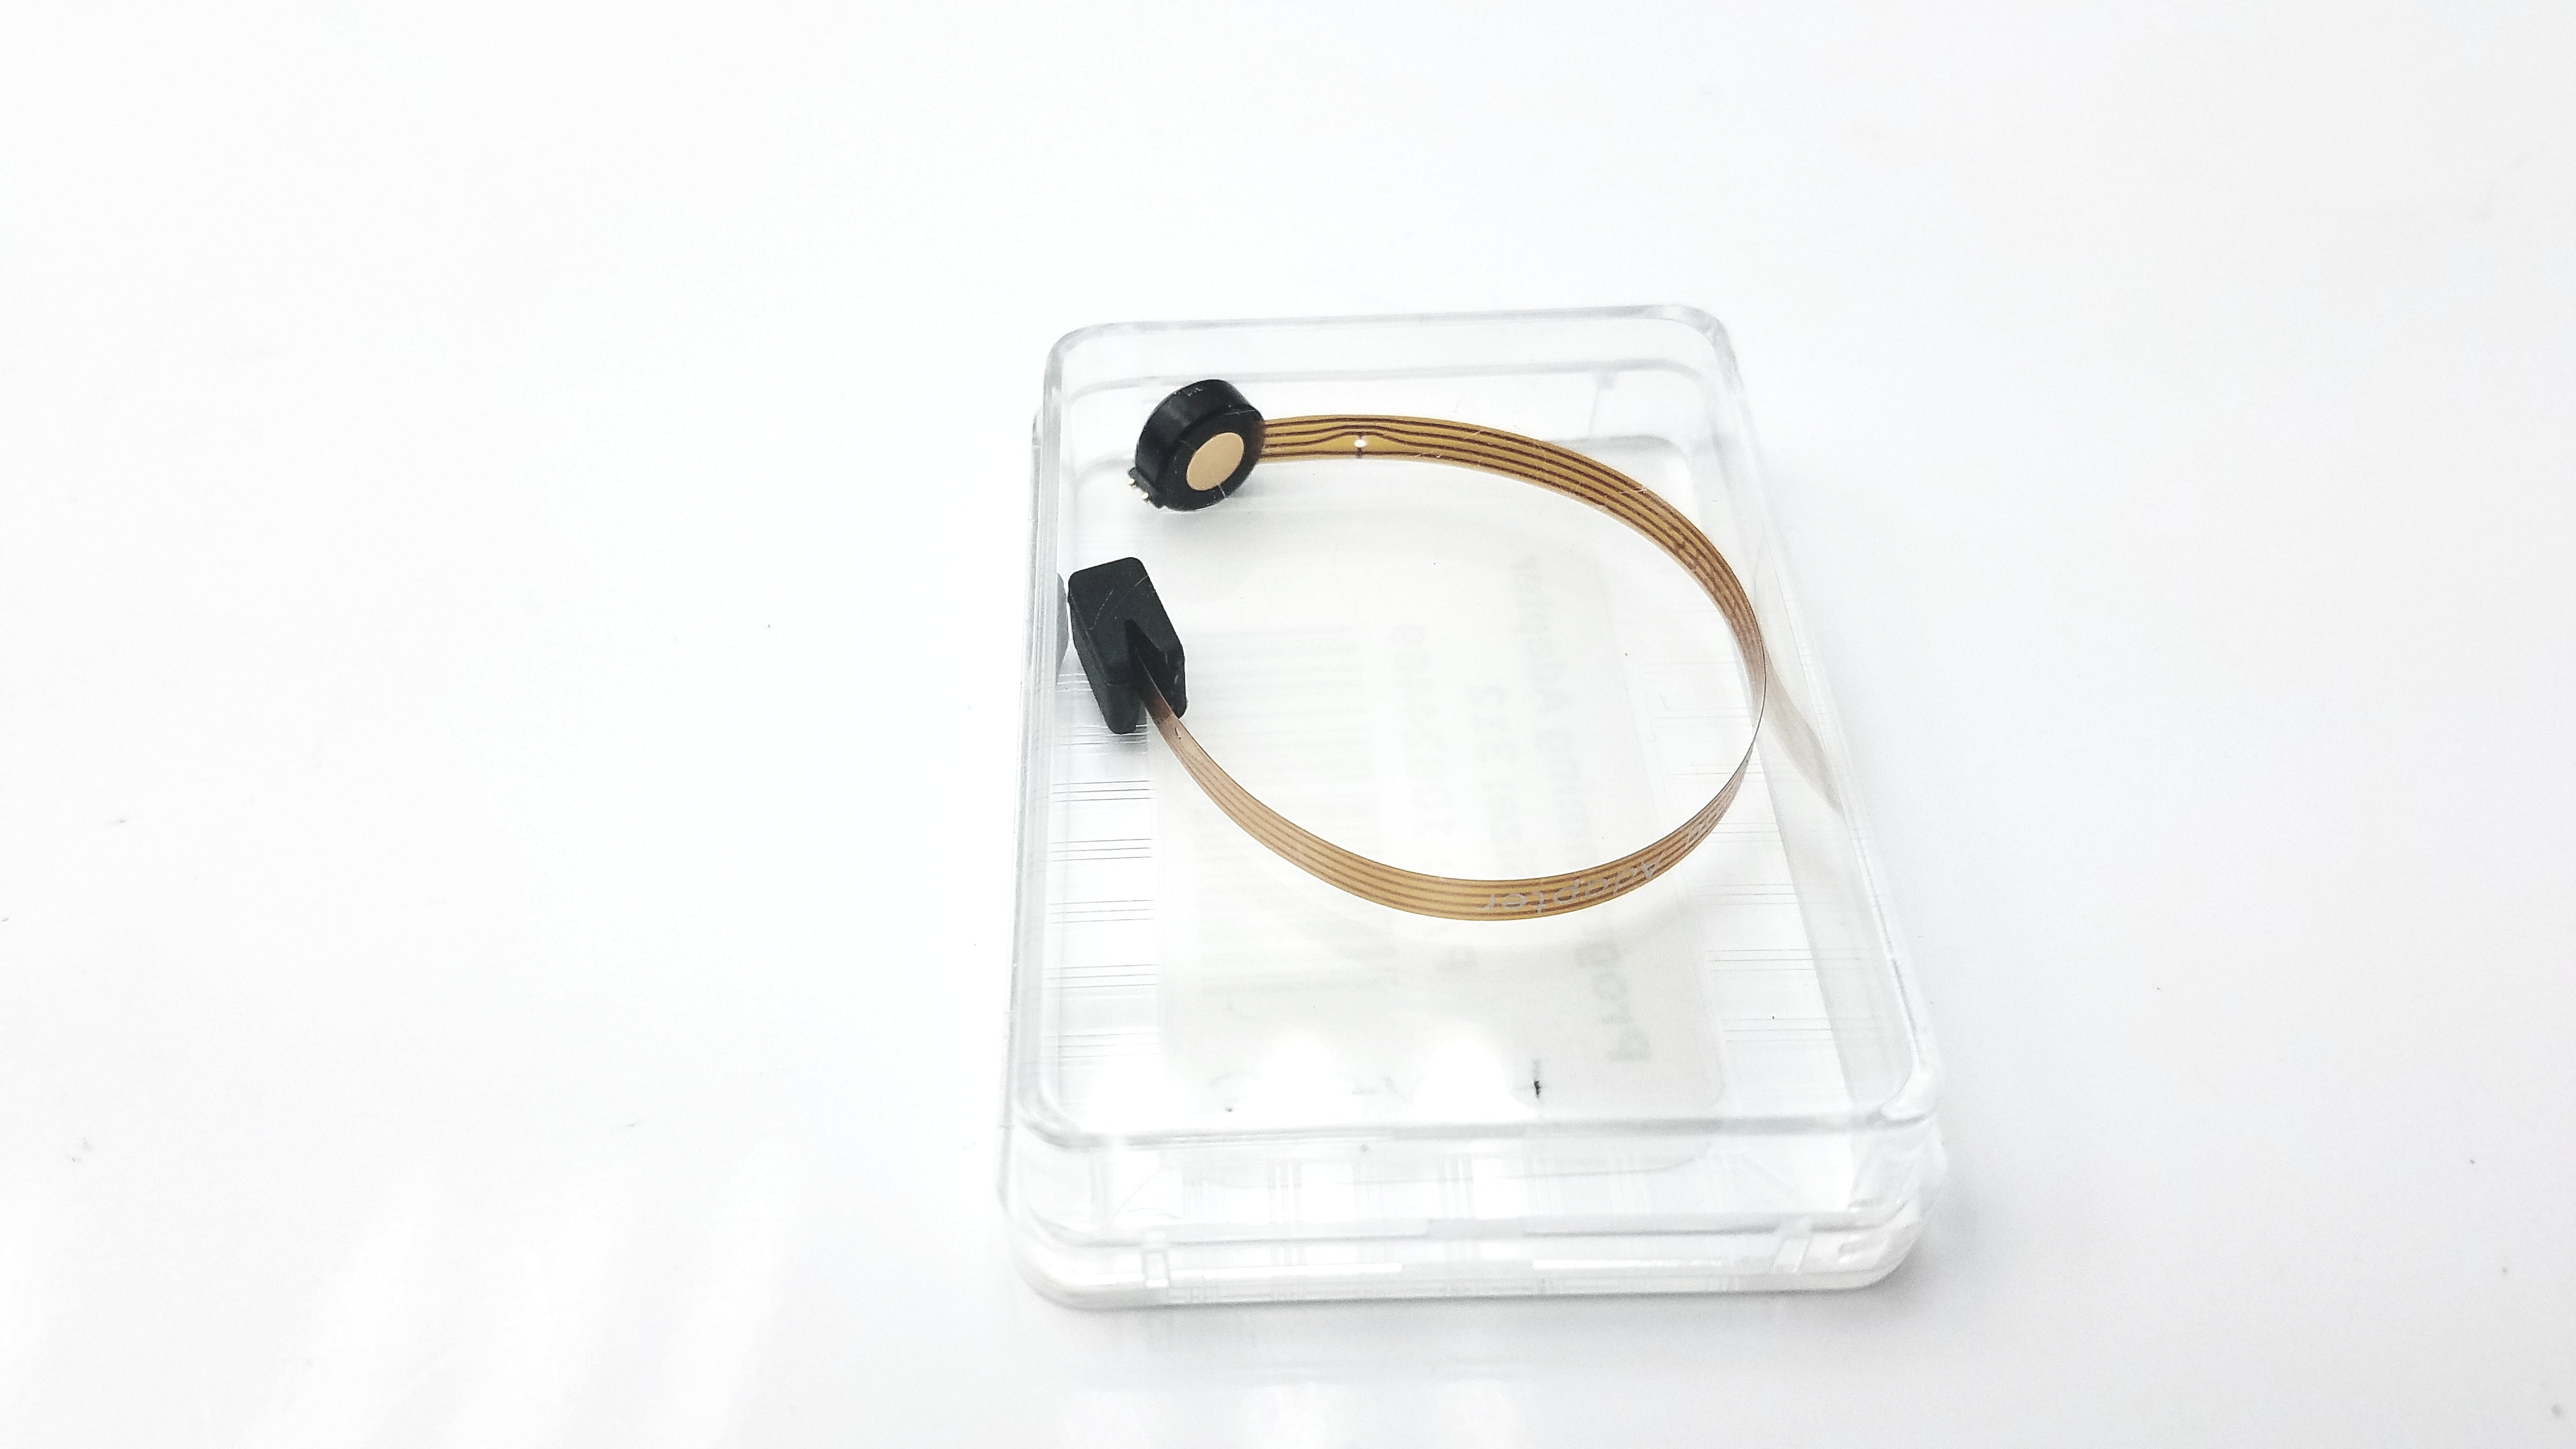 Load image into Gallery viewer, Size 312 Programming Adapter For Hearing Aids P/N: 10824469